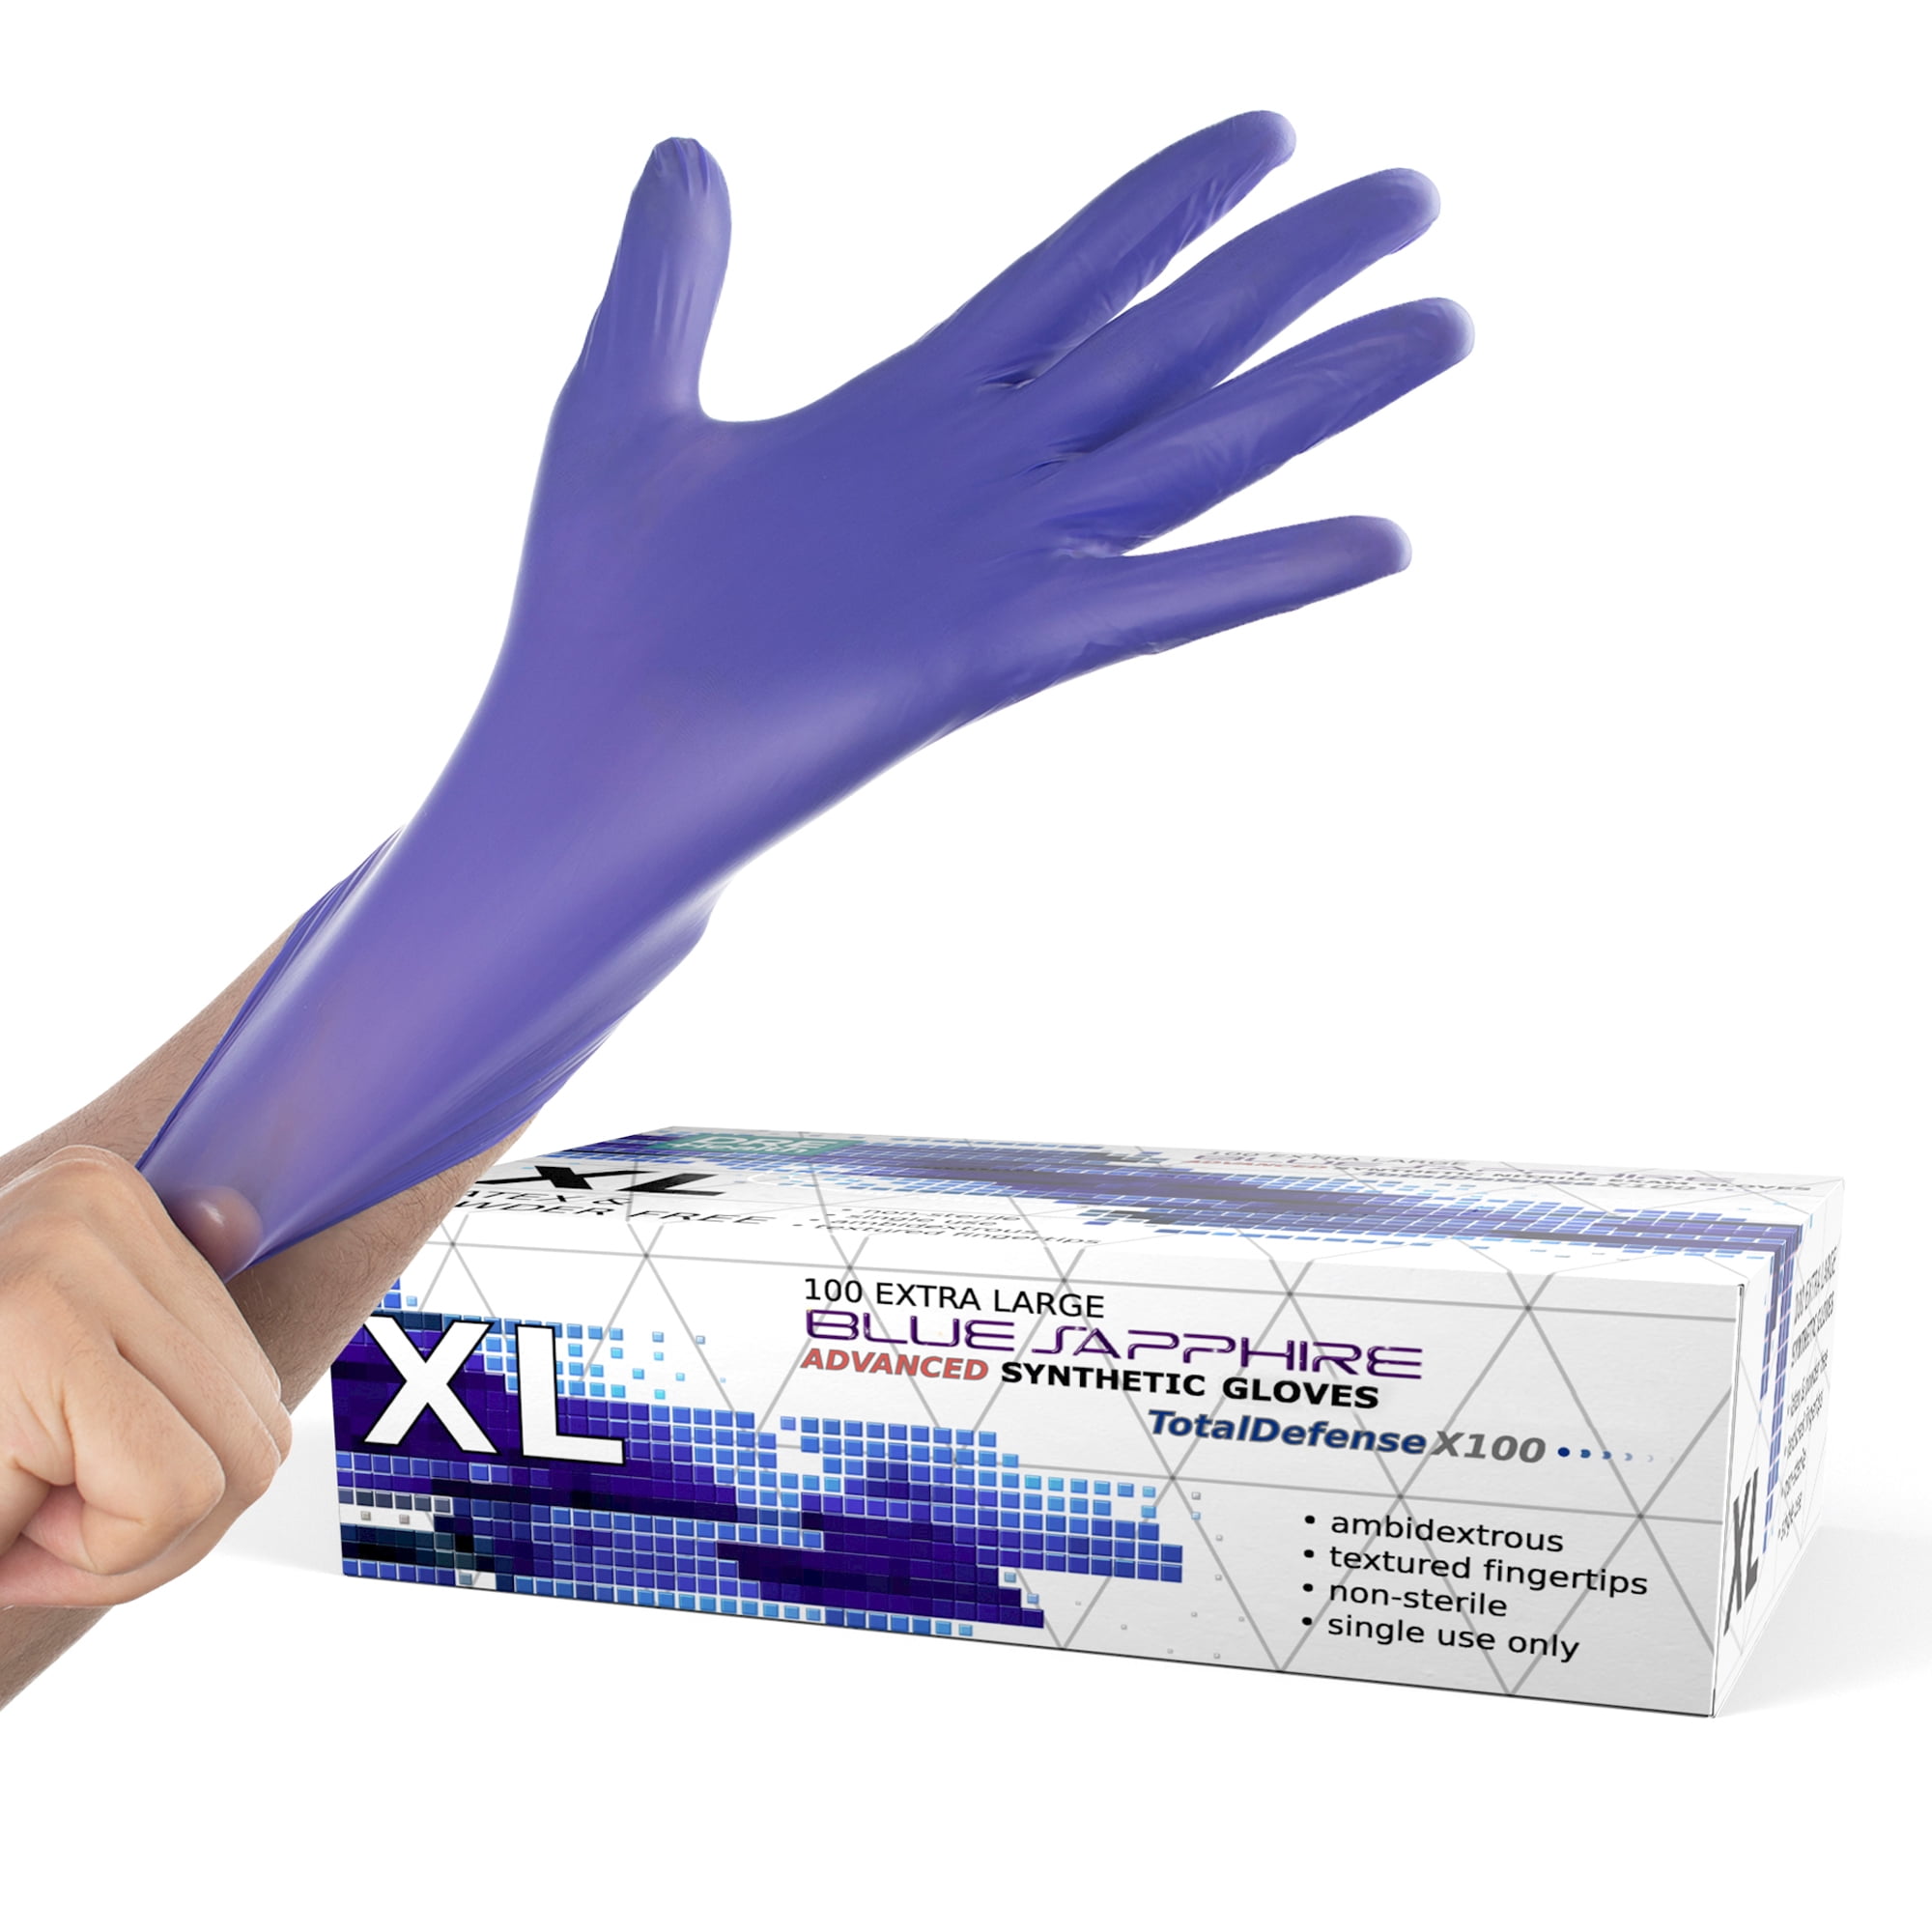 quality Nitrile hand Gloves Disposable Powder Free Blue Hairdresser care home M 